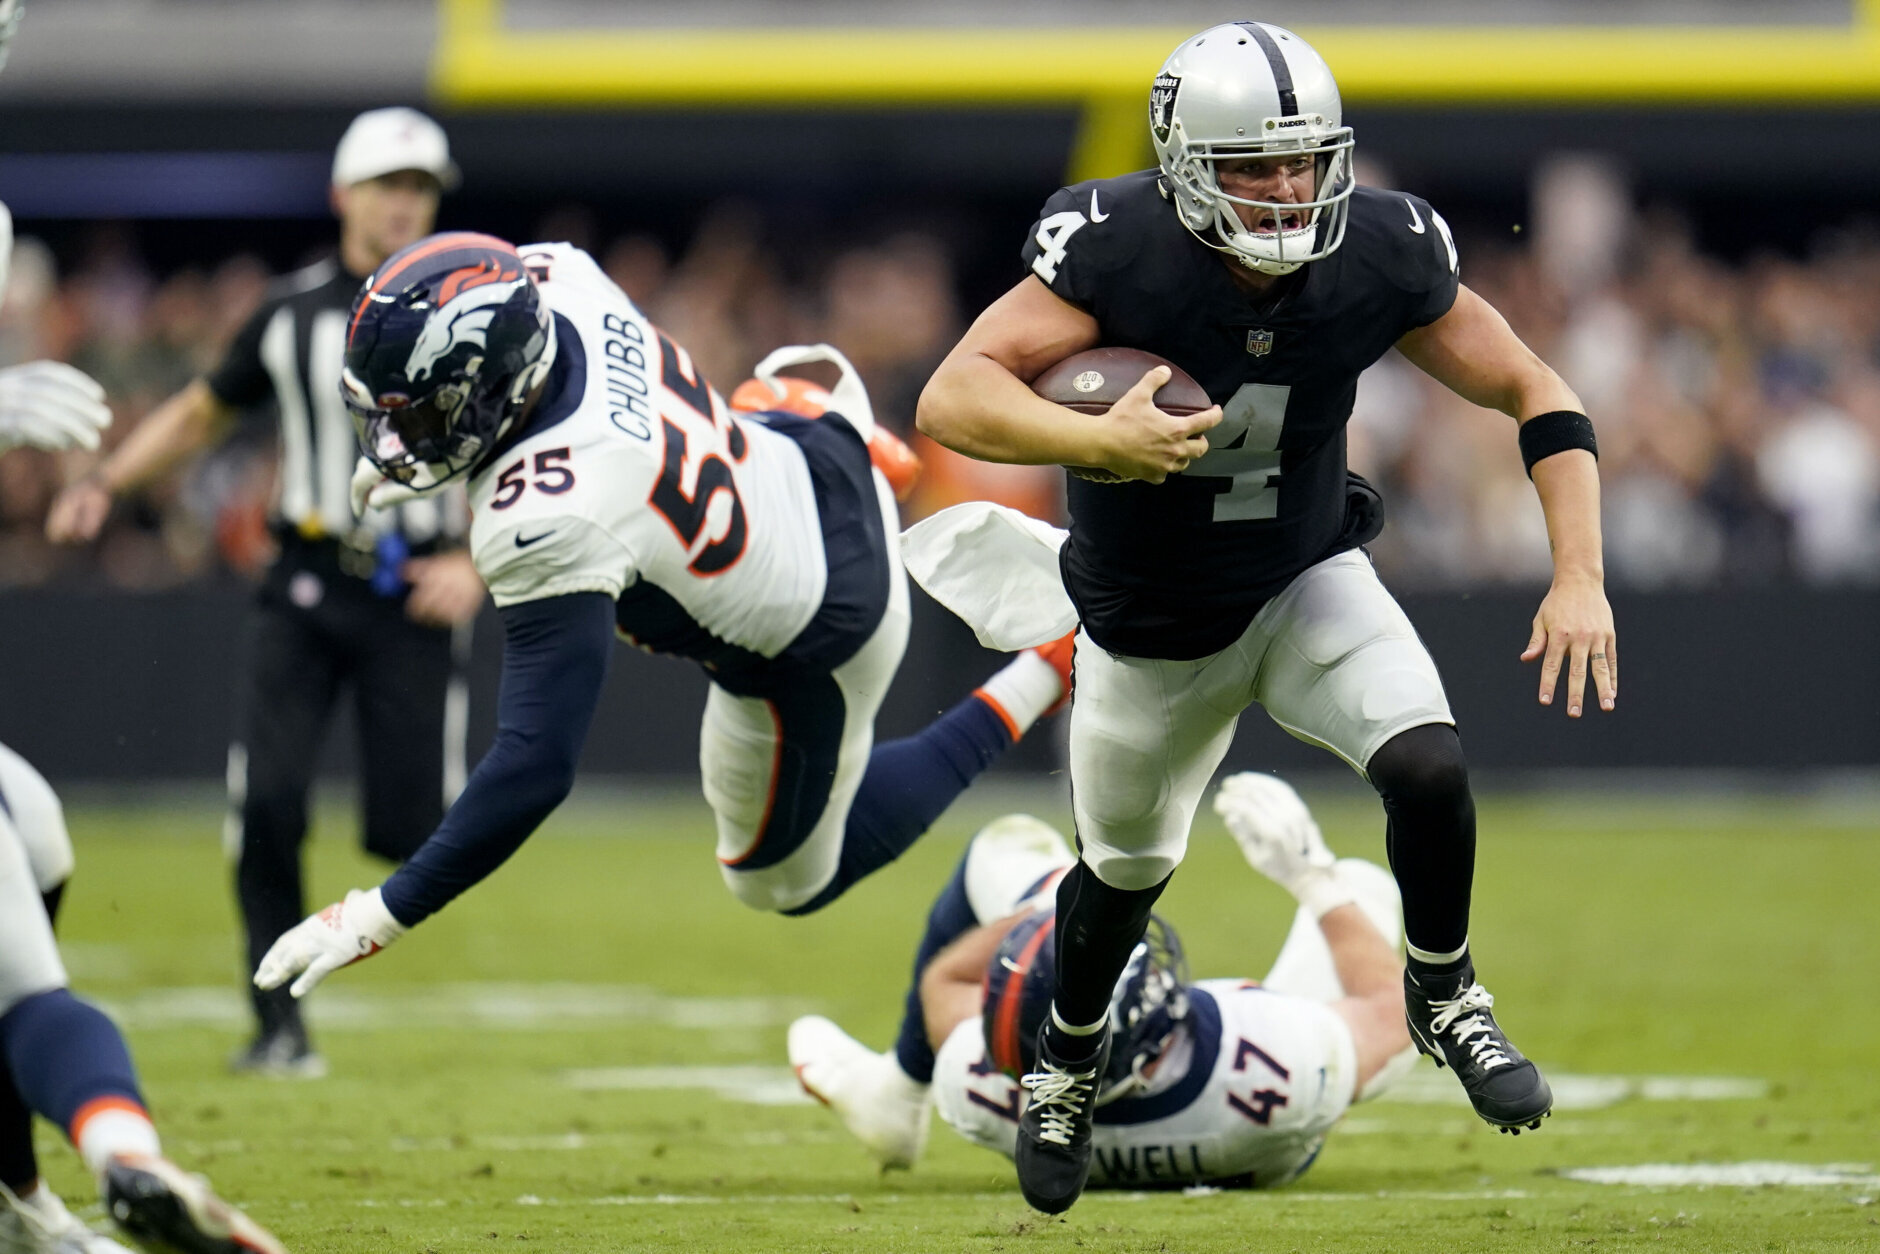 <p><b><i>Broncos 23</i></b><br />
<b><i>Raiders 32</i></b></p>
<p>Naturally, Josh McDaniels&#8217; first win as Raiders coach comes against the Broncos franchise with whom he didn&#8217;t even last two full seasons. If <a href="https://twitter.com/RDR_RAIDER/status/1574881995435417604?s=20&amp;t=R-hkHxAG8xvoih3x7pWcsQ" target="_blank" rel="noopener">Derek Carr doesn&#8217;t open his eyes</a>, McDaniels won&#8217;t last two seasons in Vegas either.</p>
